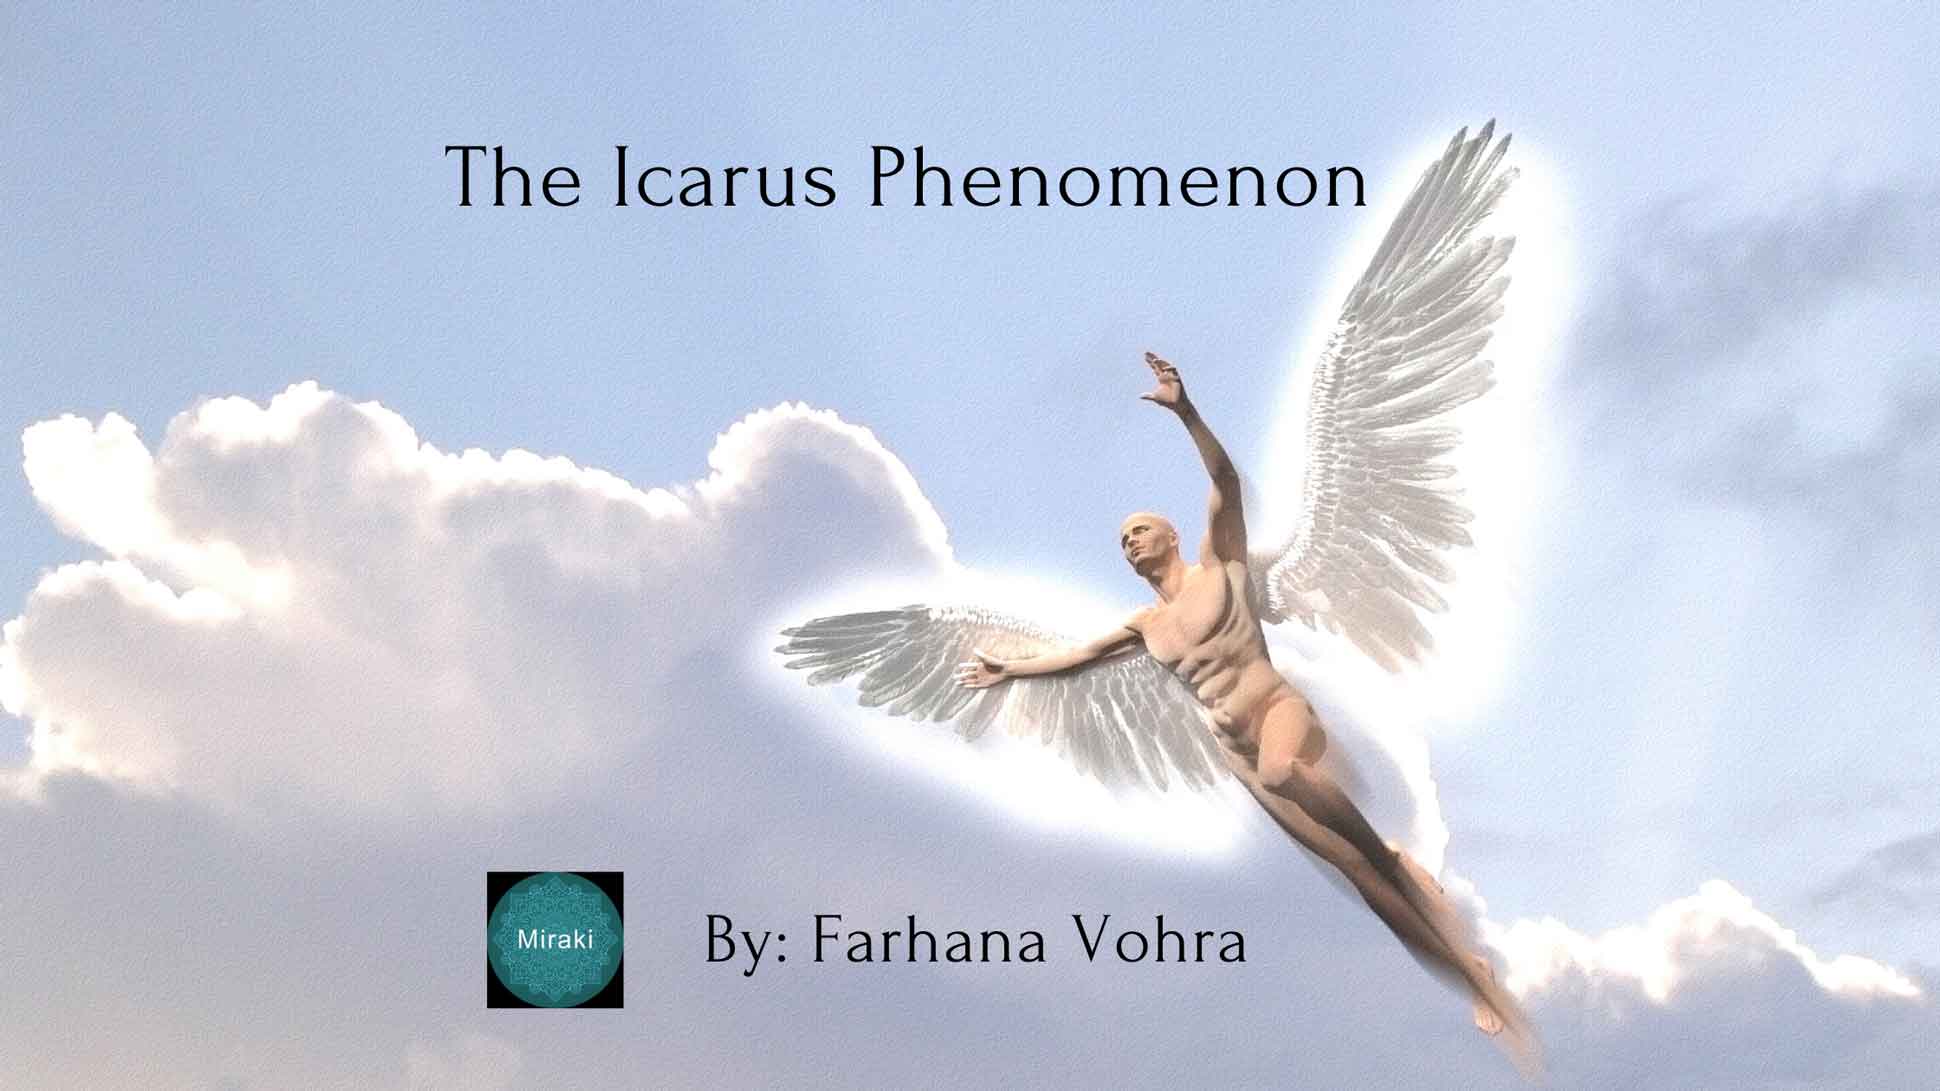 is icarus a true story